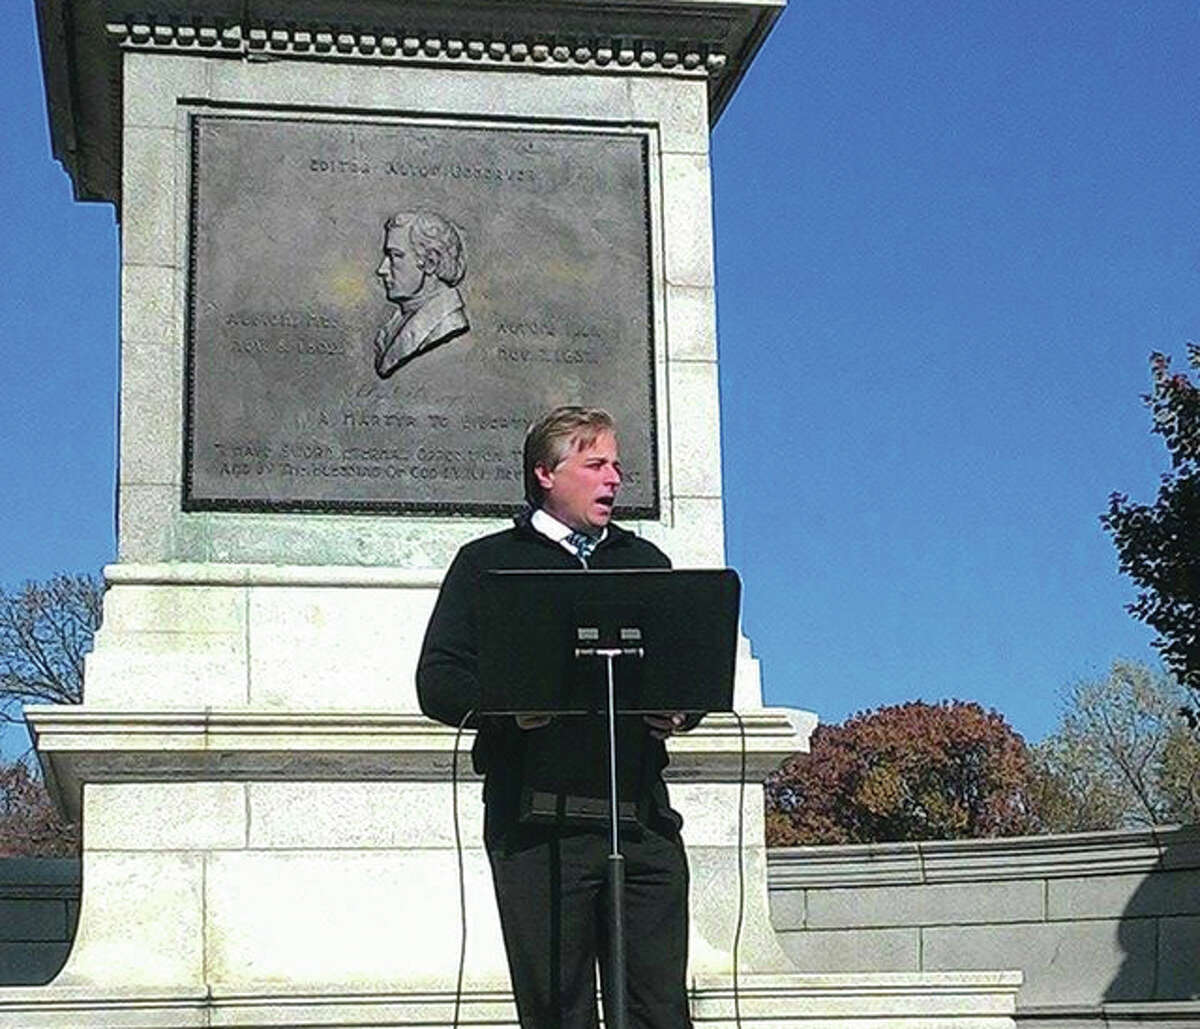 Alton Mayor Brant Walker proclaimed Nov. 9, 2015, Lovejoy Day in Alton to commemorate the birth of slain abolitionist Elijah P. Lovejoy, who was killed by an angry mob in Alton on Nov. 7, 1837. Cory Davenport | The Telegraph